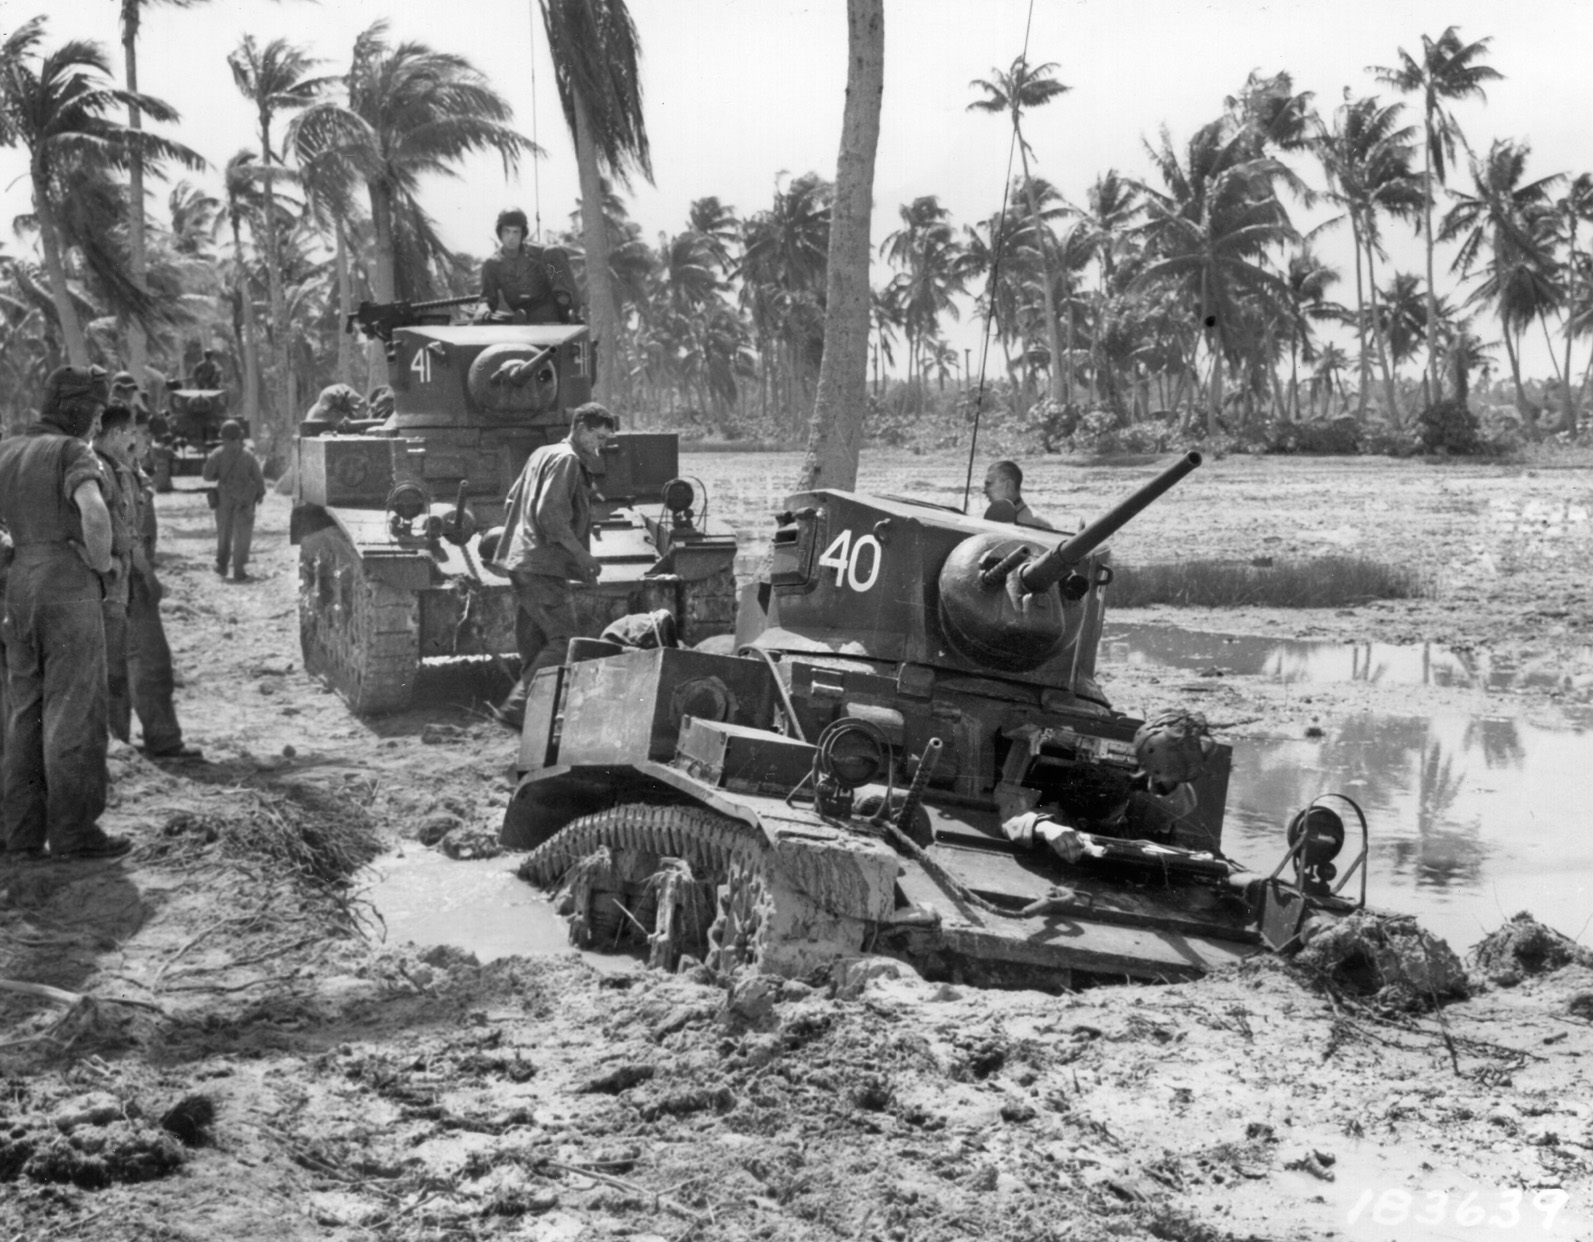 An M3 Stuart light tank of the 193rd Tank Battalion has bogged down in a shell crater on Makin Island while supporting the 27th Infantry Division. The 193rd traded their Stuarts for Shermans before they reached Okinawa.